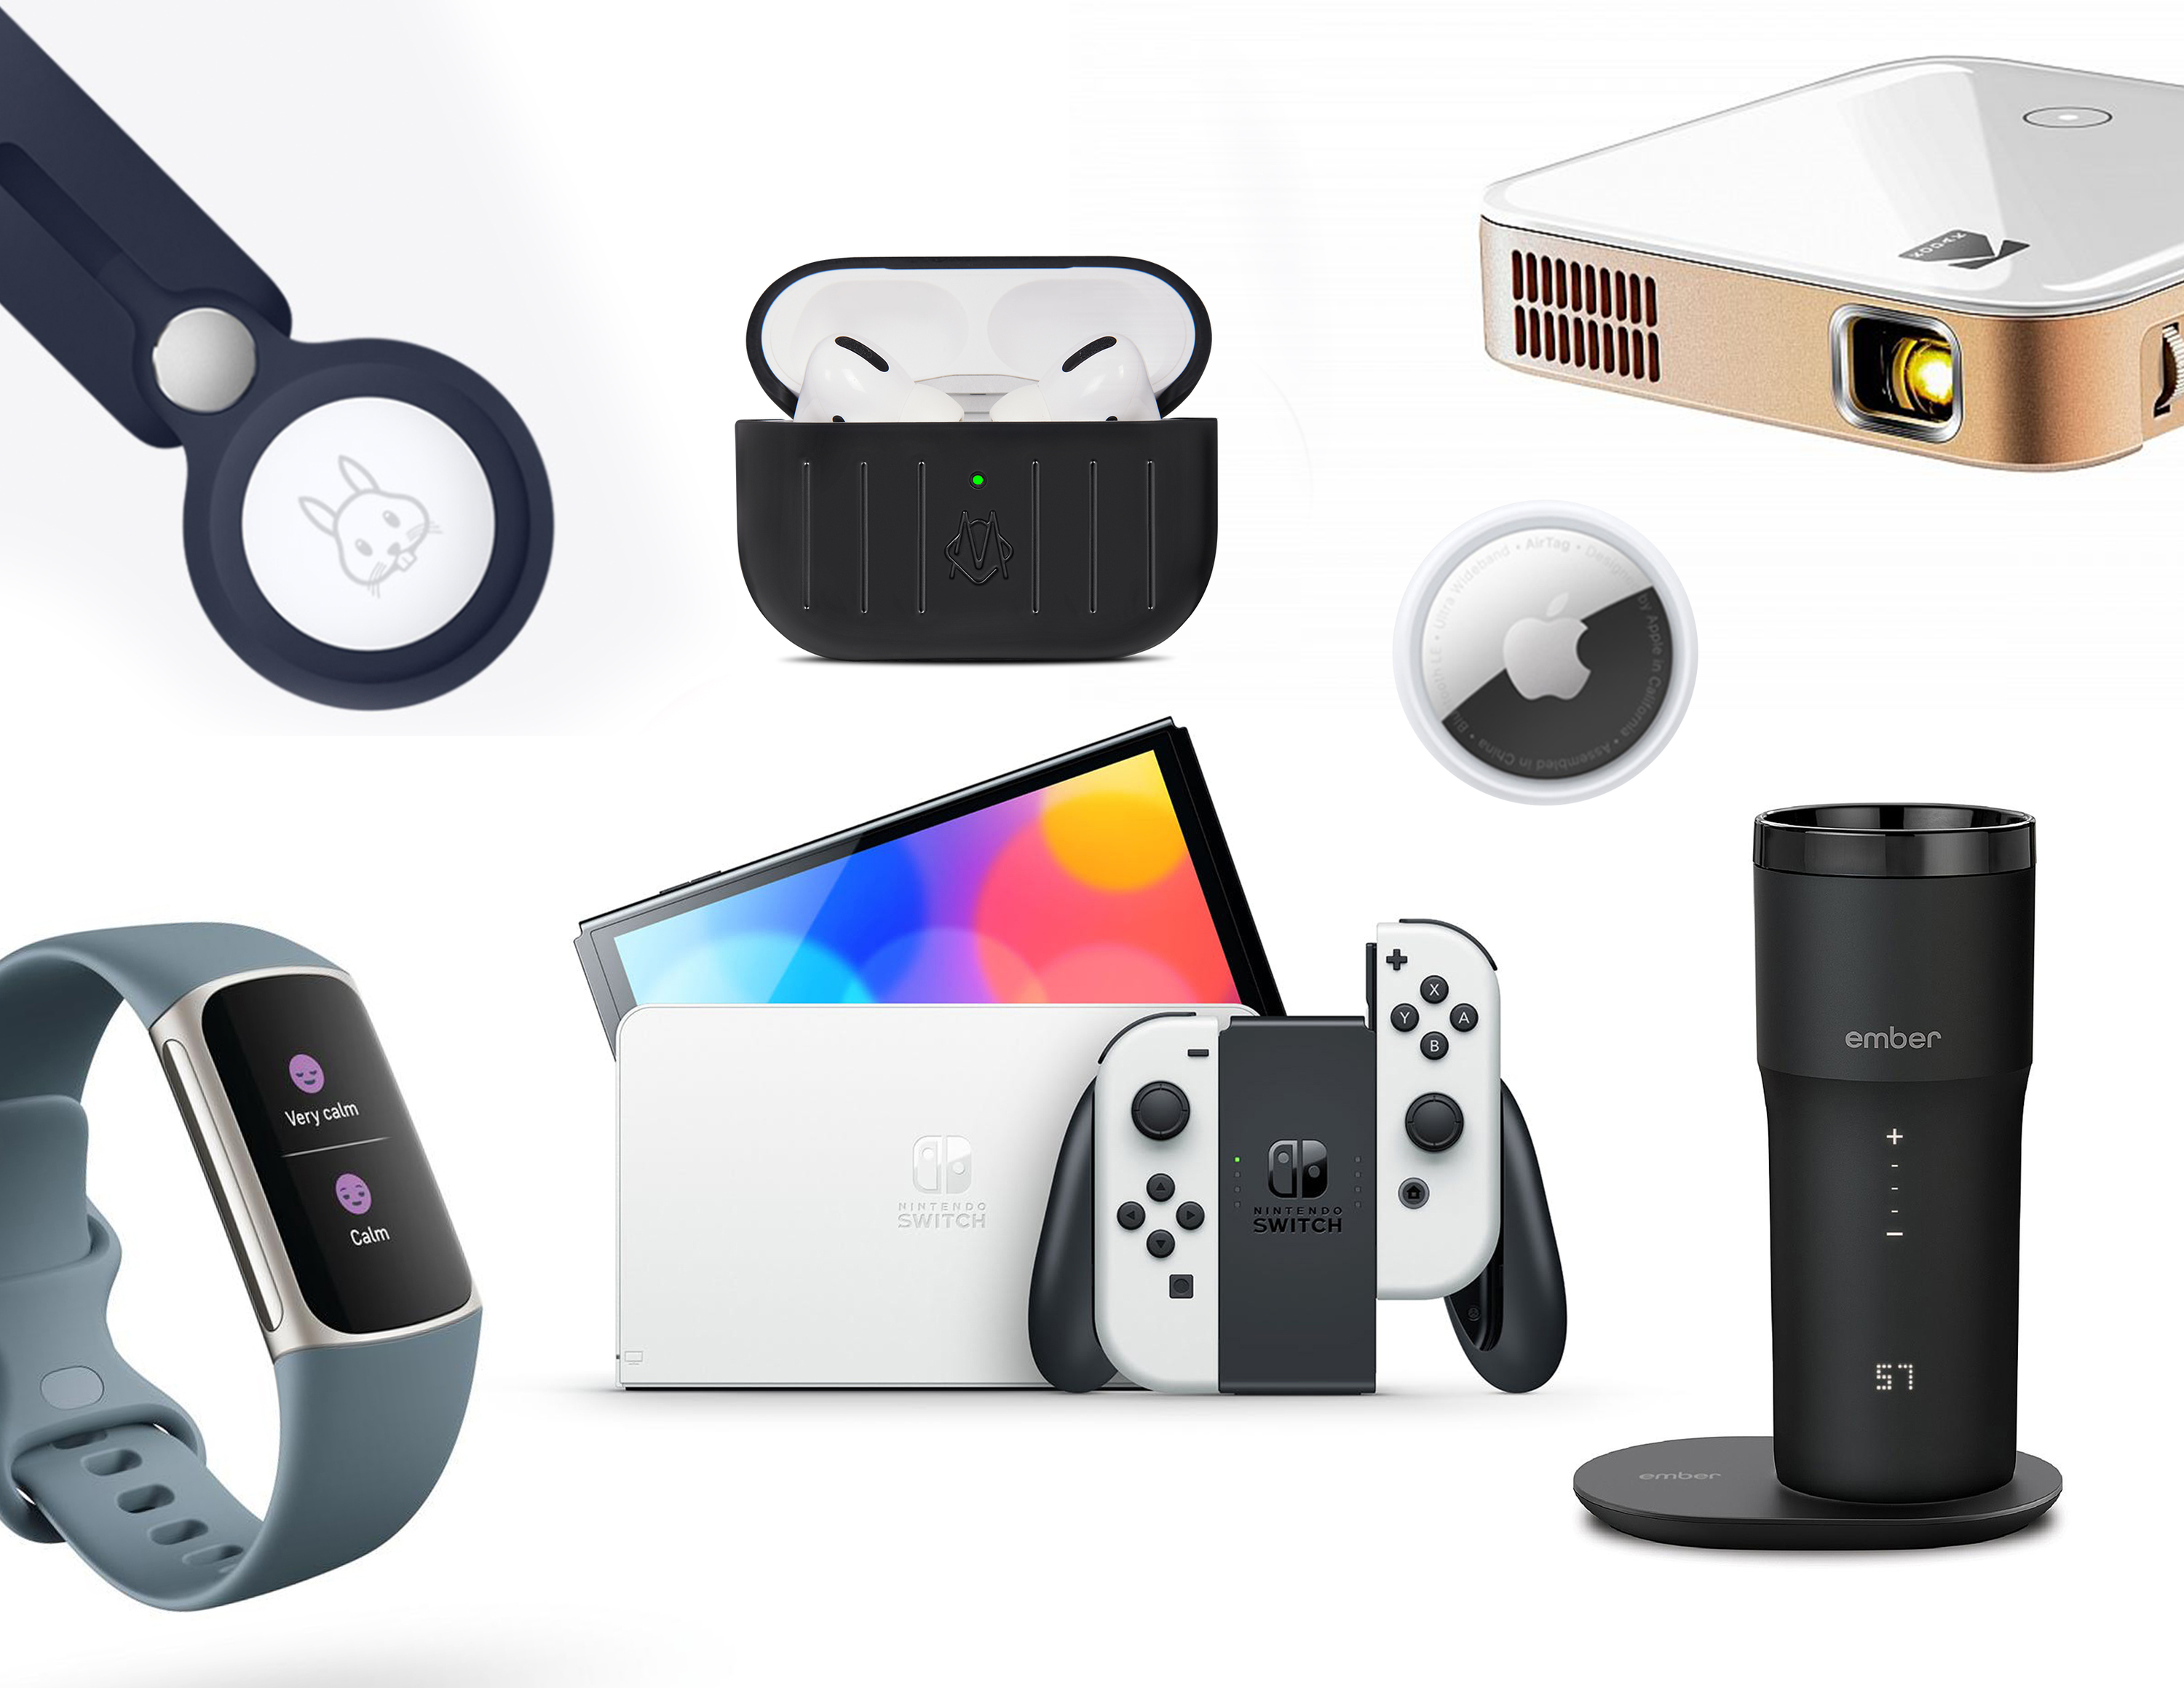 Christmas Gift Guide 2021: Best gifts for techies